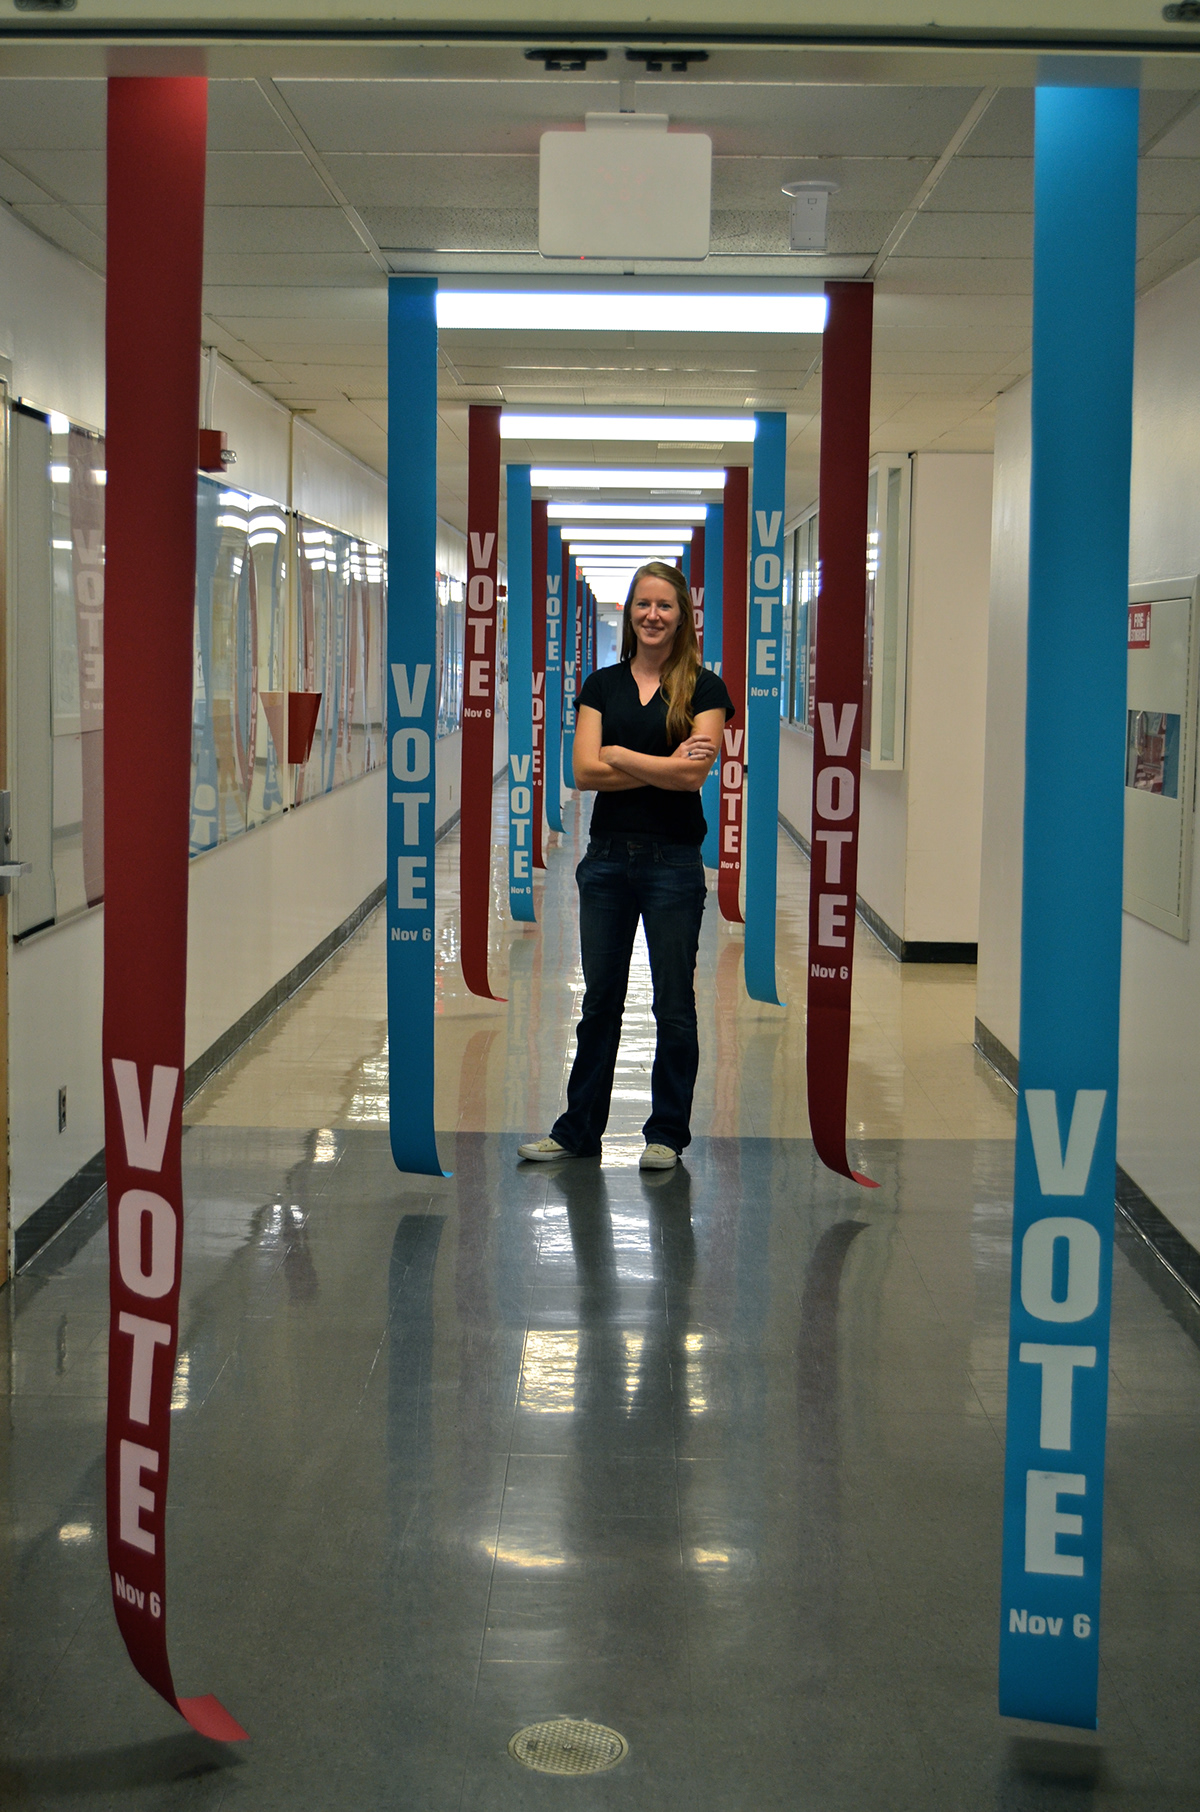 vote  2012  america  election  banners  hallway  November 6th